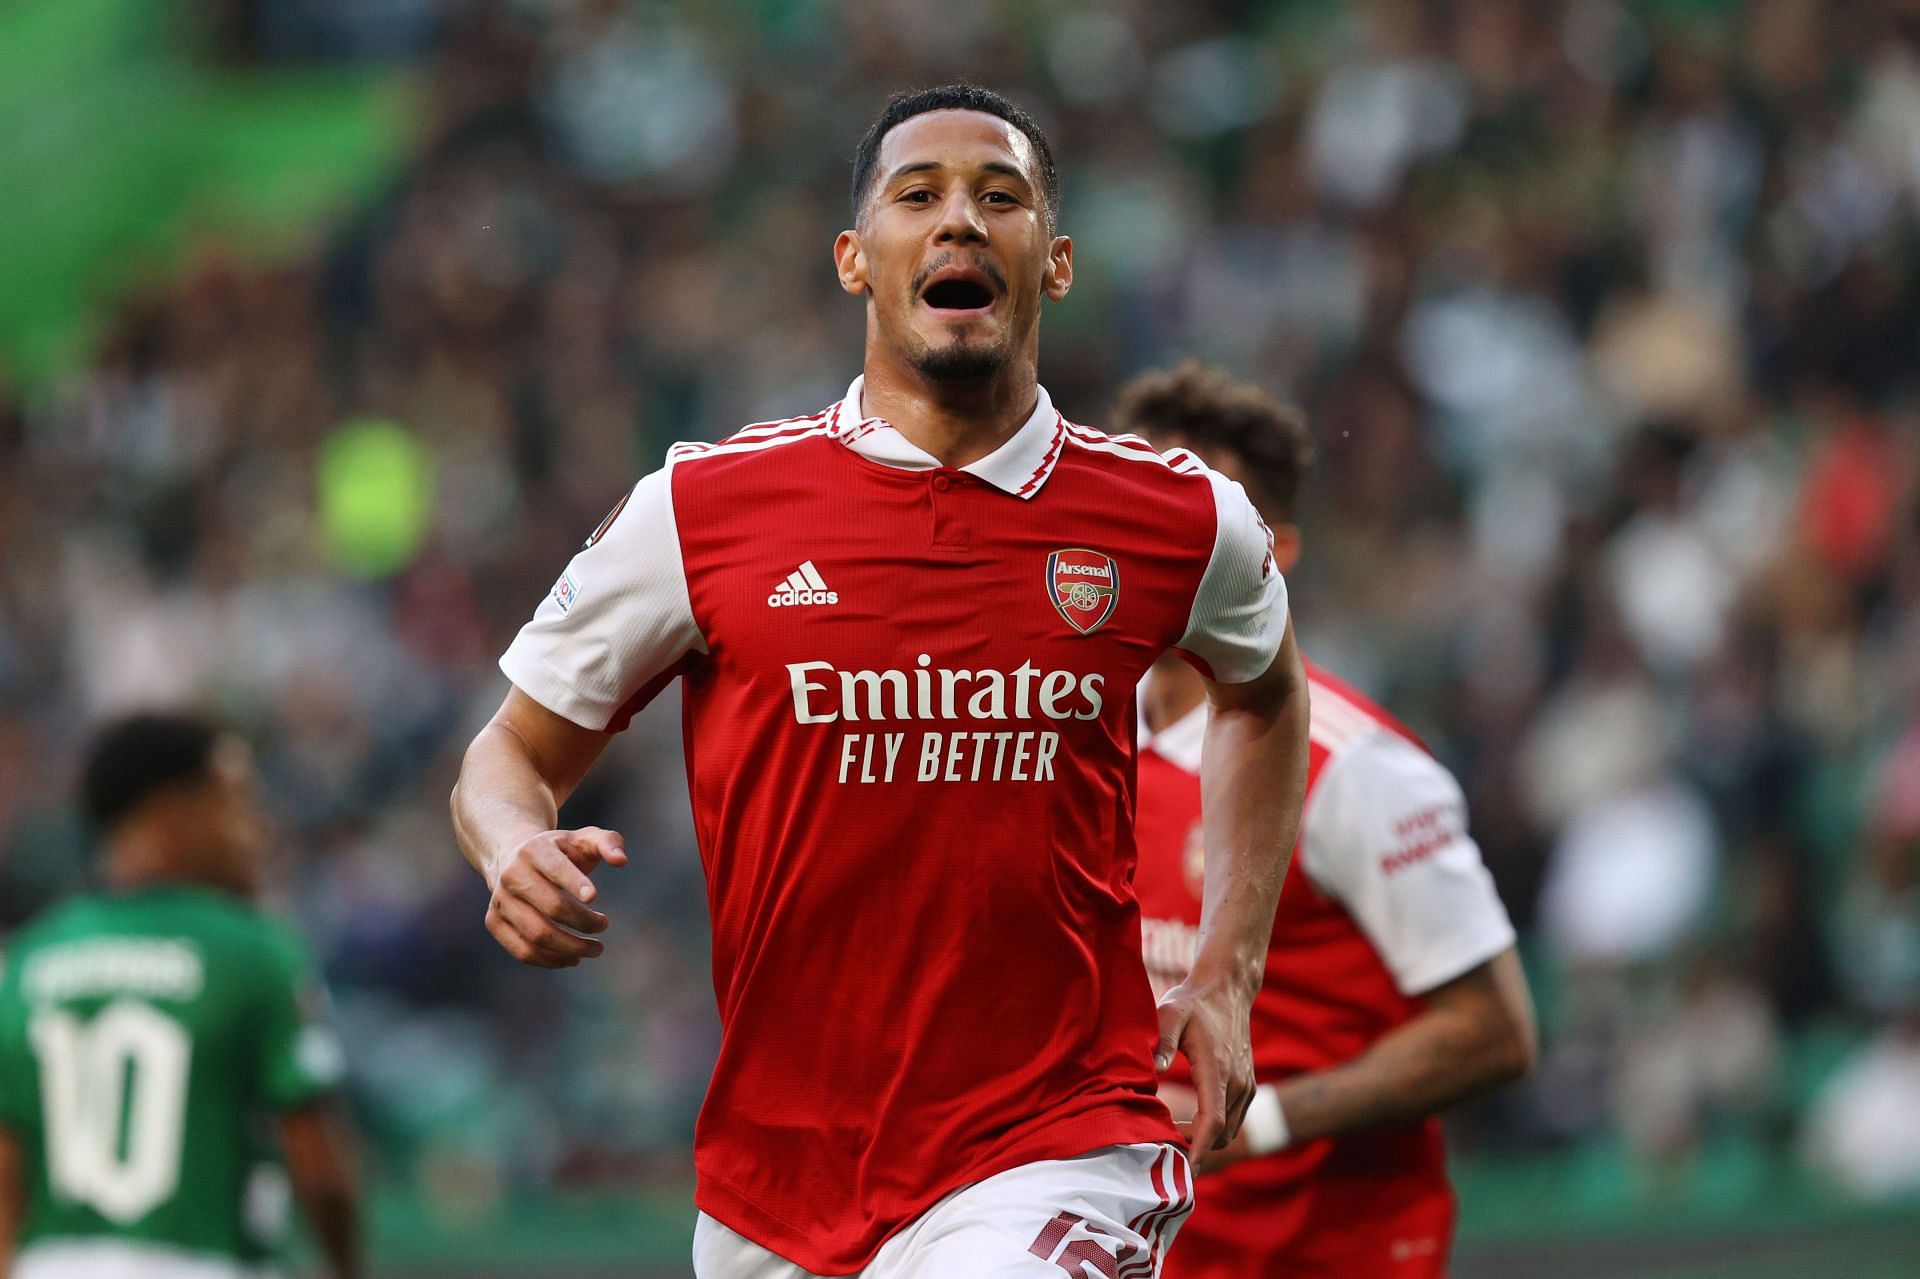 William Saliba has been rock solid at the back this season